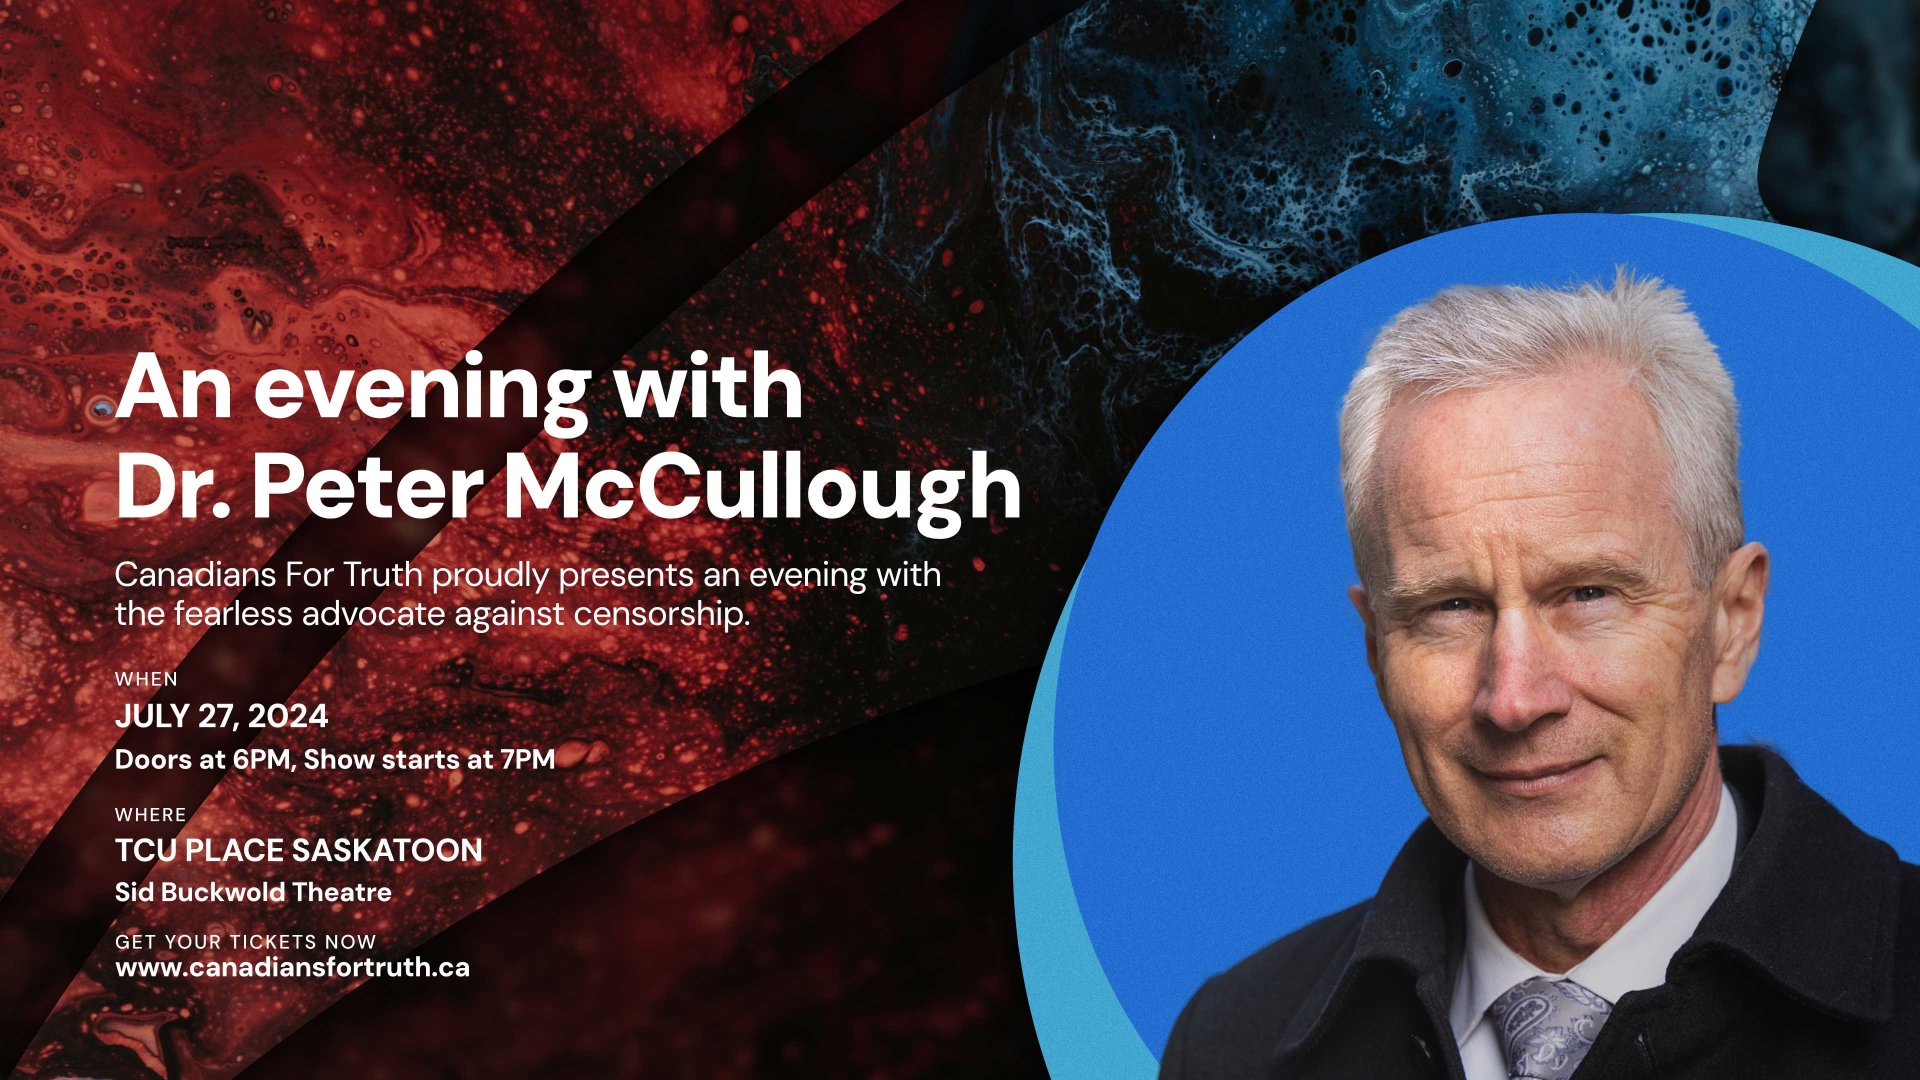 An Evening With Dr. Peter McCullough - July 27th at TCU Place